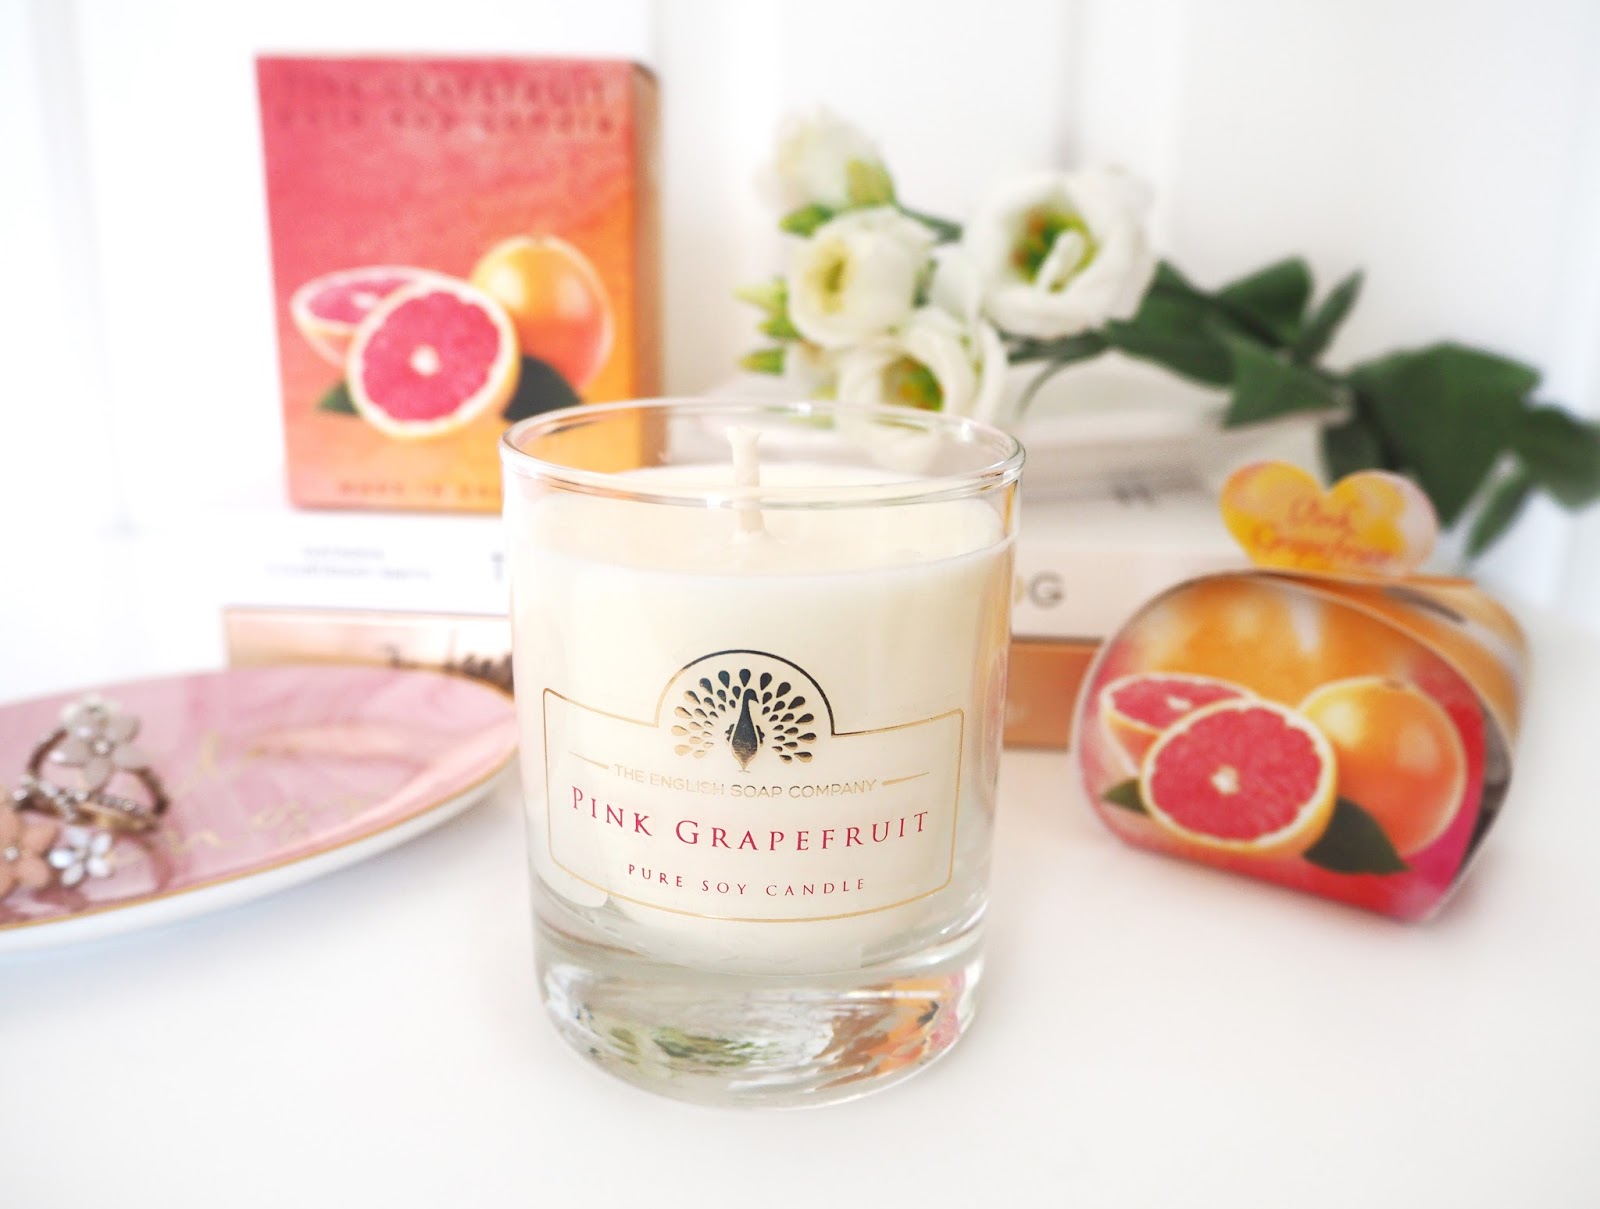 The English Soap Company Pink Grapefruit Collection, Katie Kirk Loves, Handmade Soaps, Candle Review, Handmade Candles, Handmade in the UK, Fragranced Candles, Handmade Gifts, UK Blogger, Beauty Blogger, Candle Blogger, Lifestyle Blogger